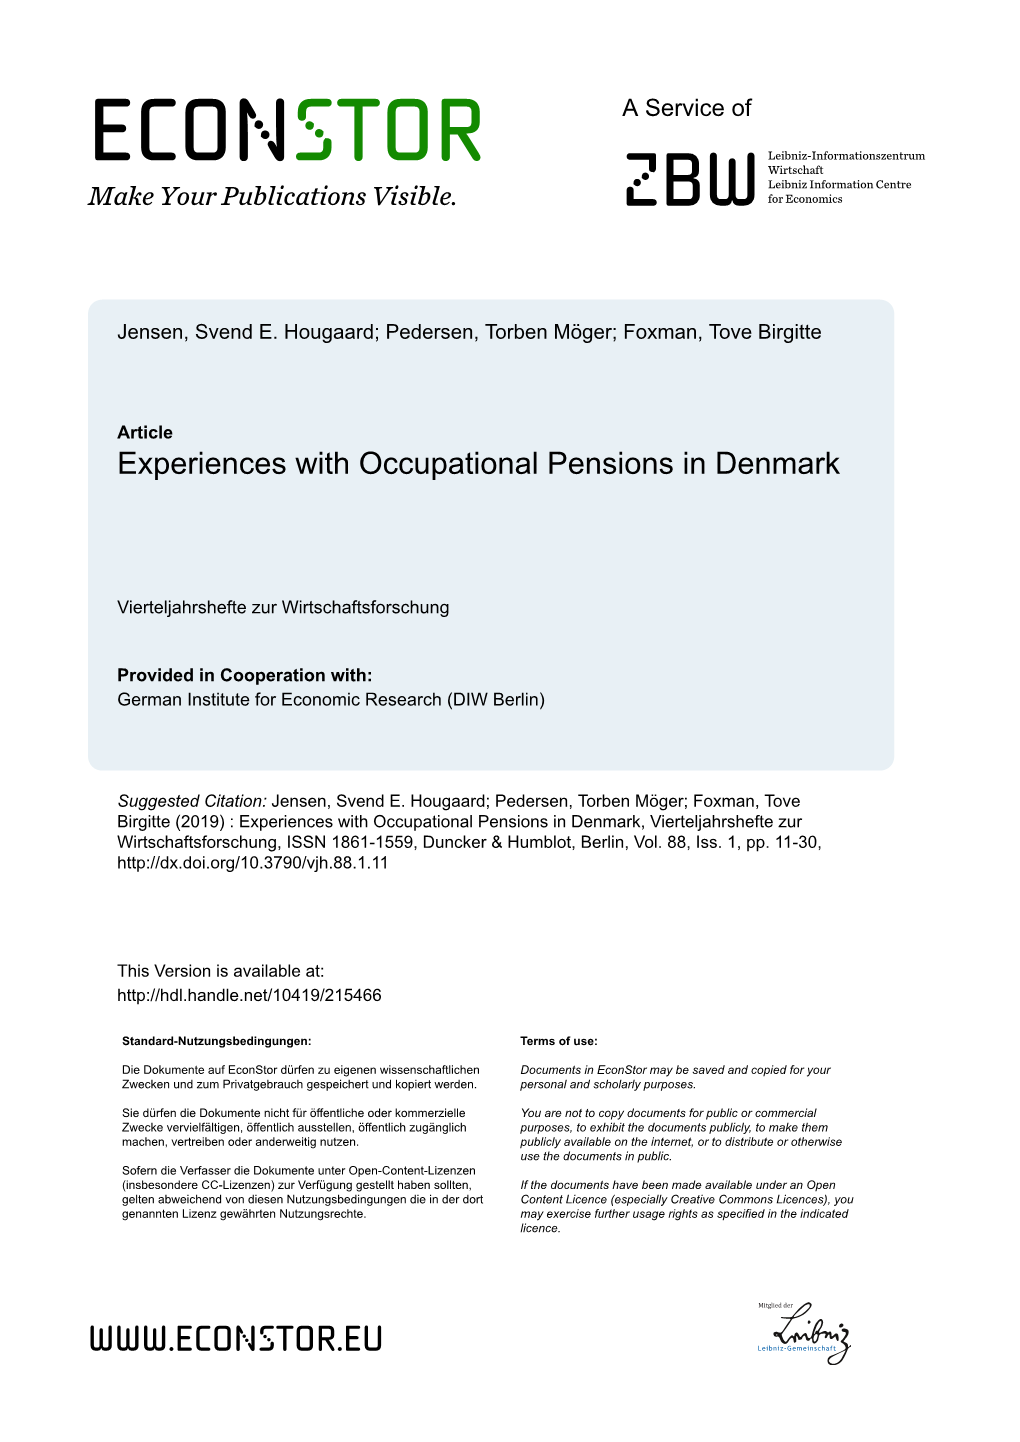 Experiences with Occupational Pensions in Denmark*